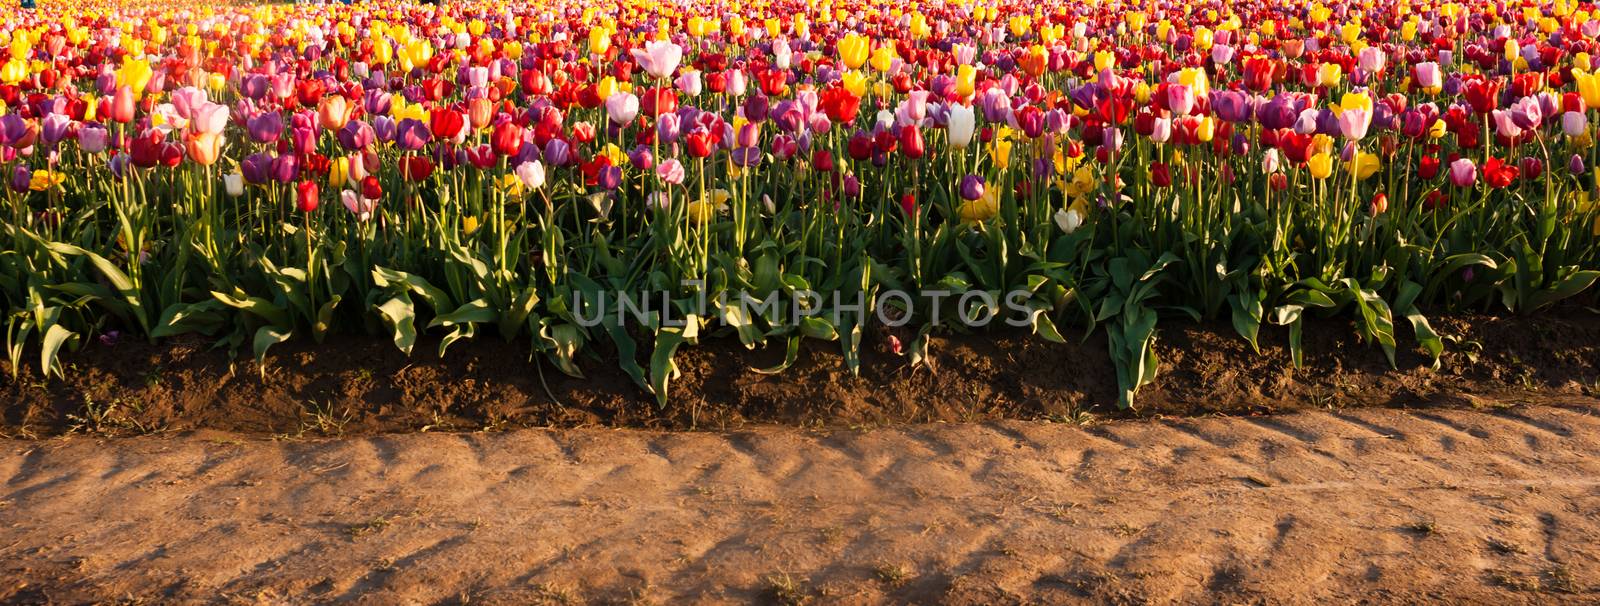 Neat Rows Tulips Colorful Flowers Farmer's Bulb Farm Tractor Path by ChrisBoswell